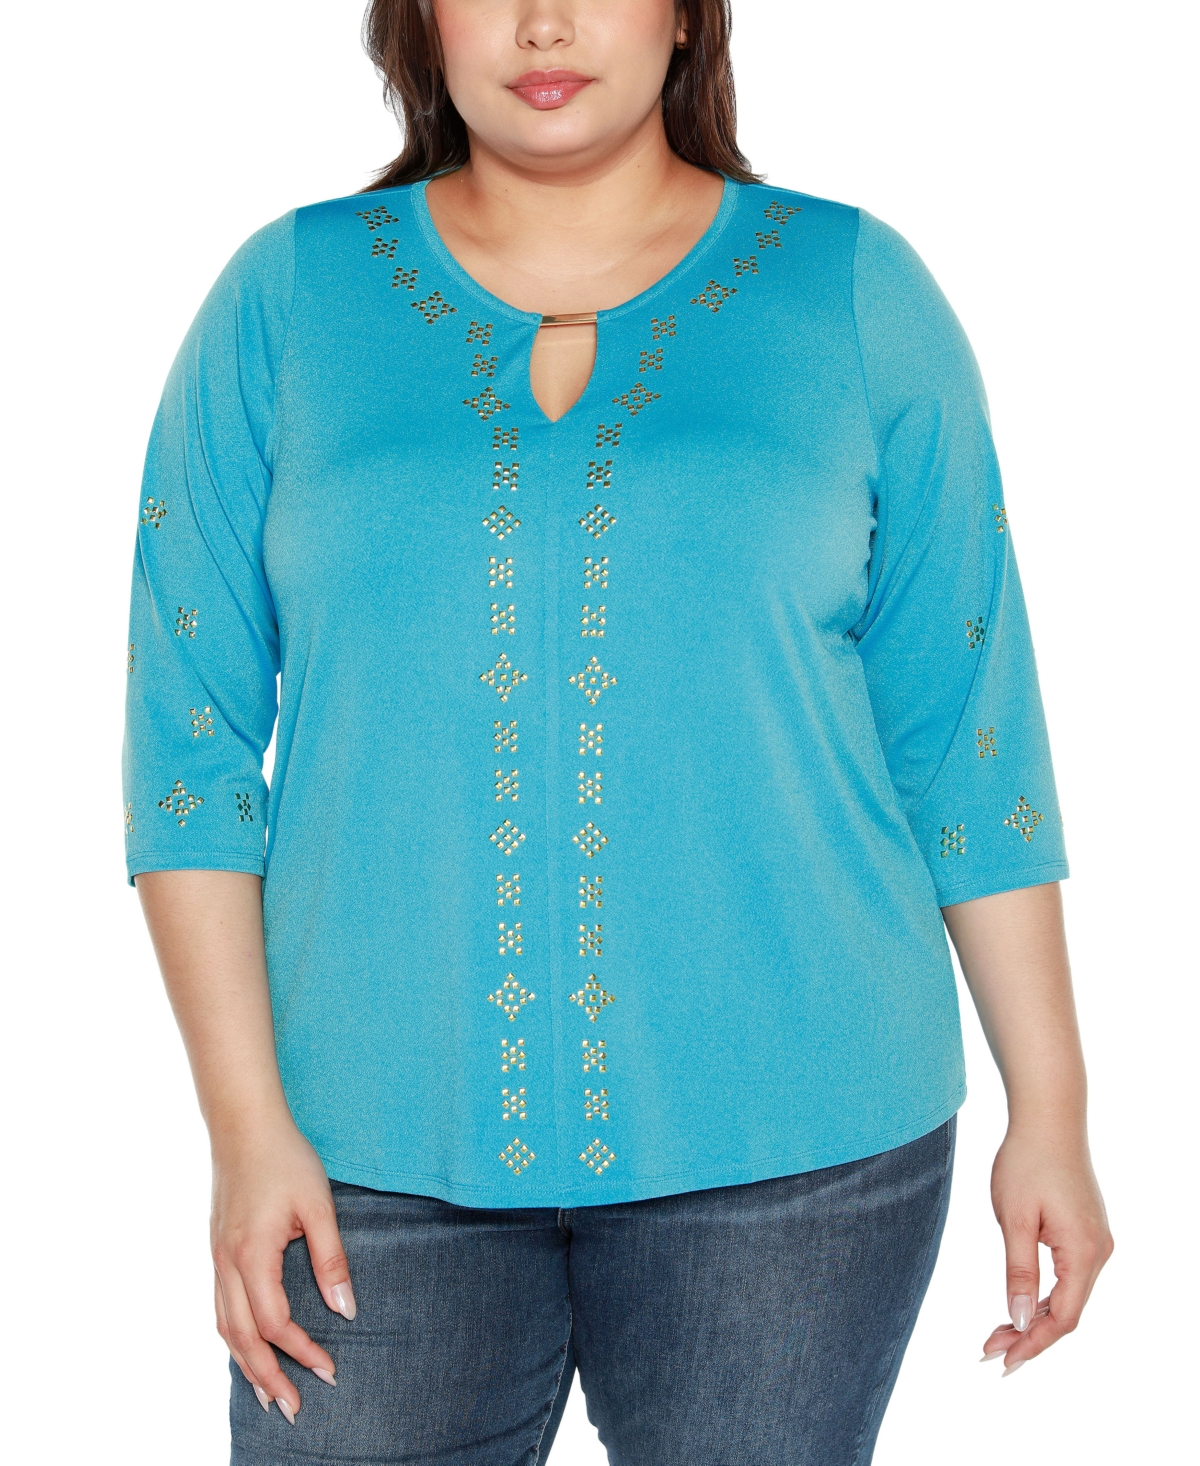 Belldini Black Label Plus Size Embellished Keyhole Knit Top In Blue Bliss